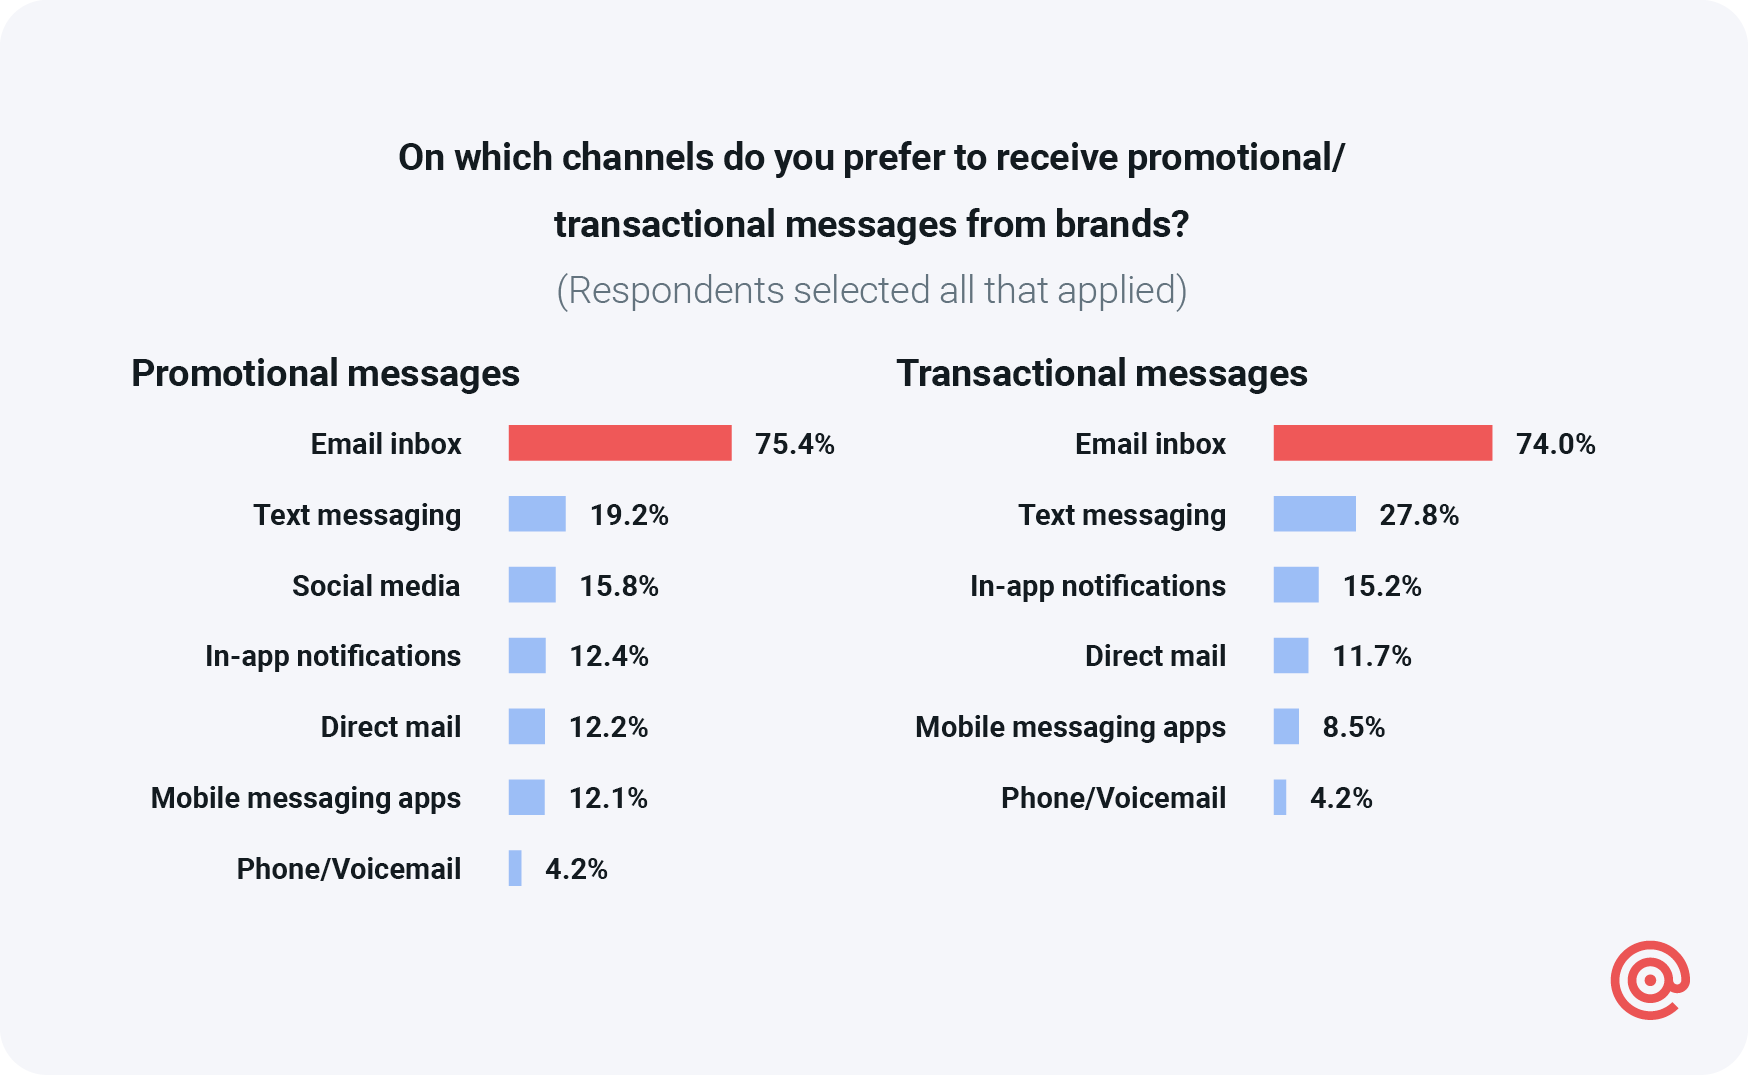 Chart comparing channel preferences for transactional and promotional messages